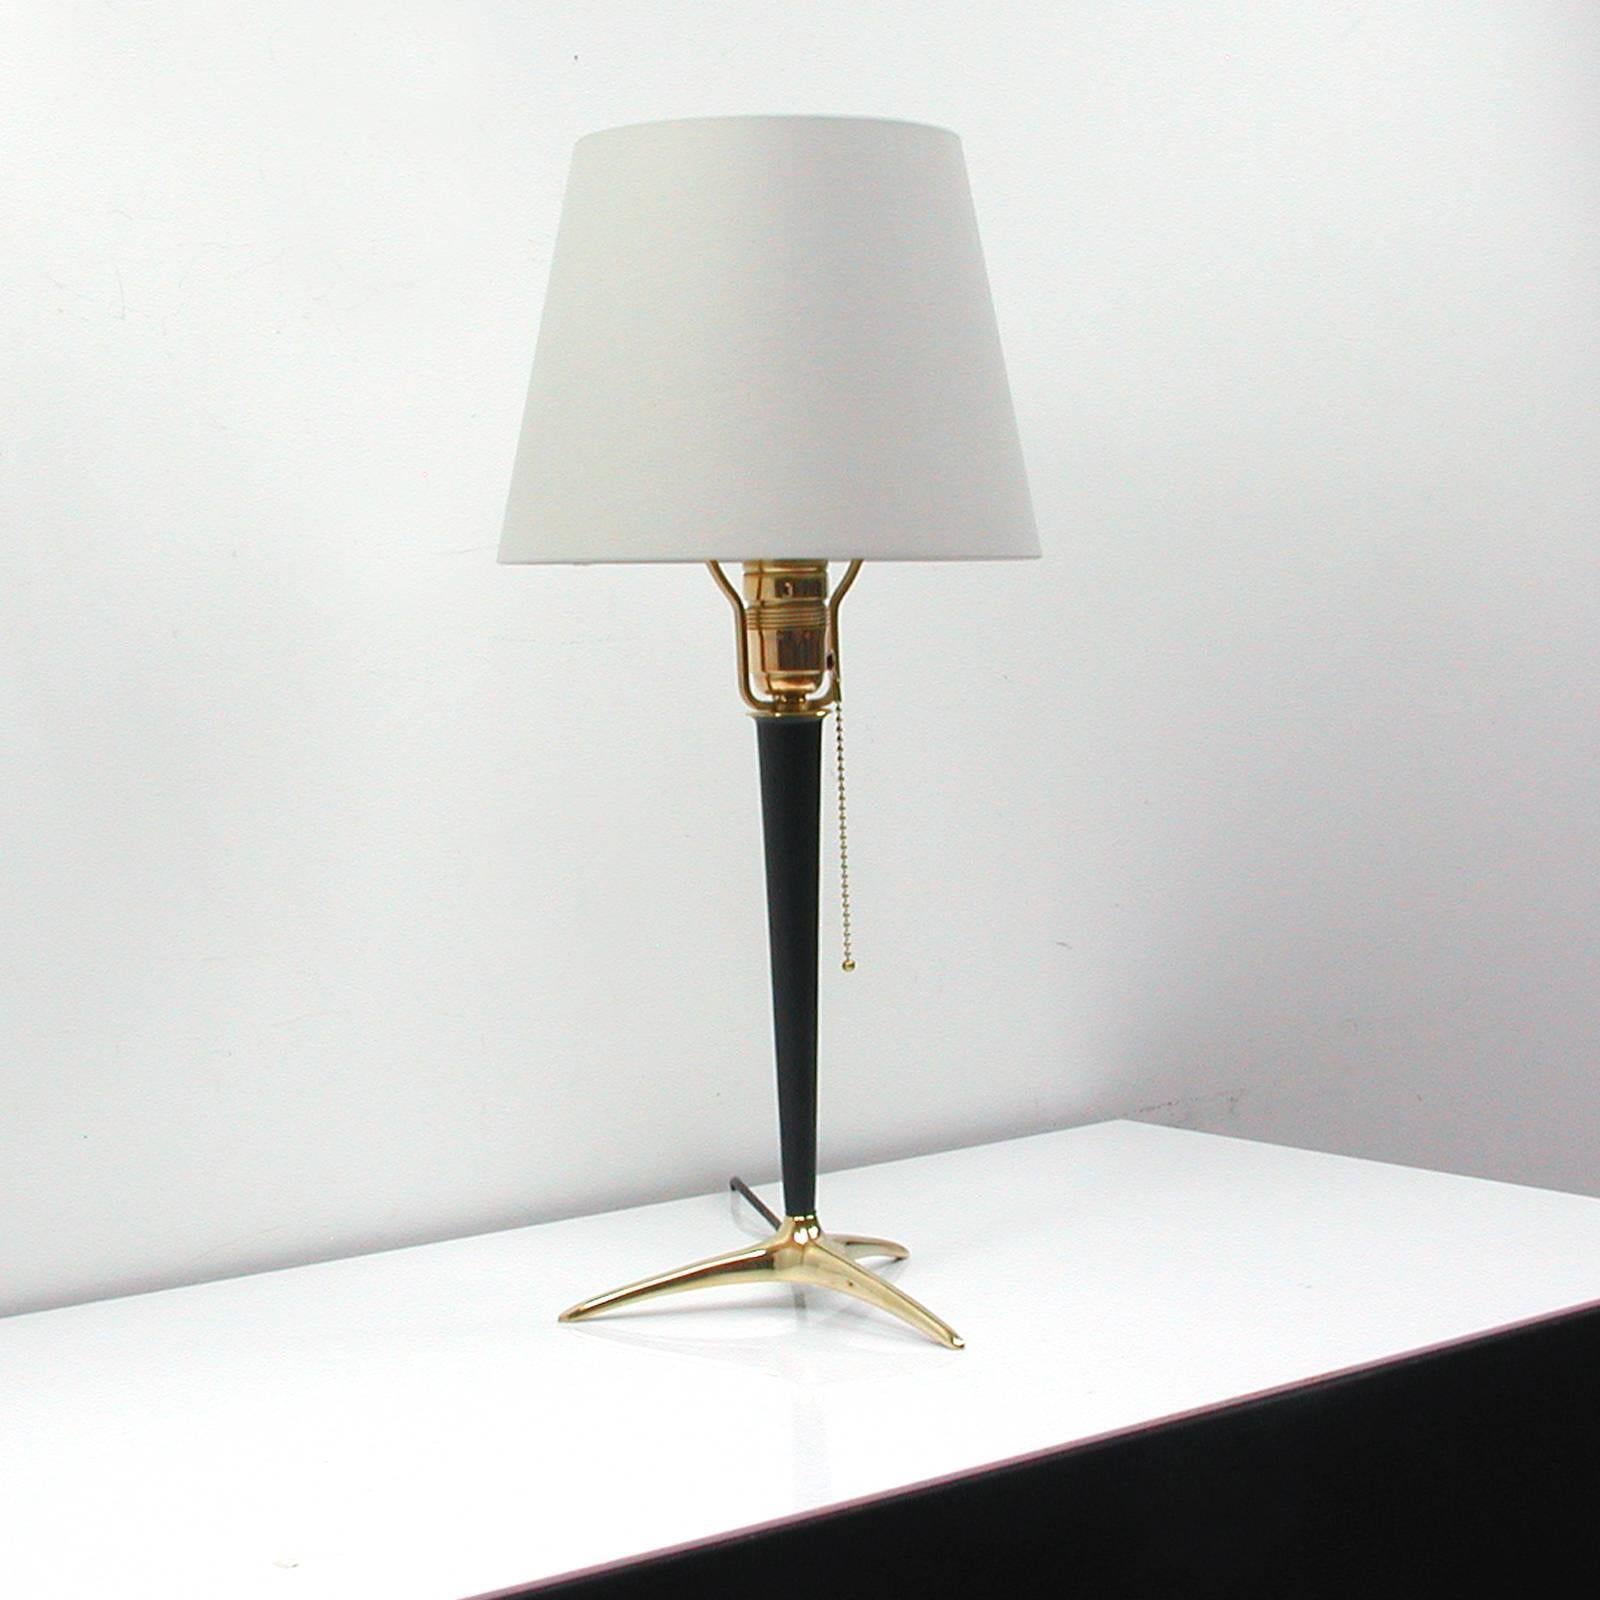 Tripod brass and black lacquered metal table lamp, made in Austria in the 1950s in the manner of J.T. Kalmar.
The lamp shade is cream colored.